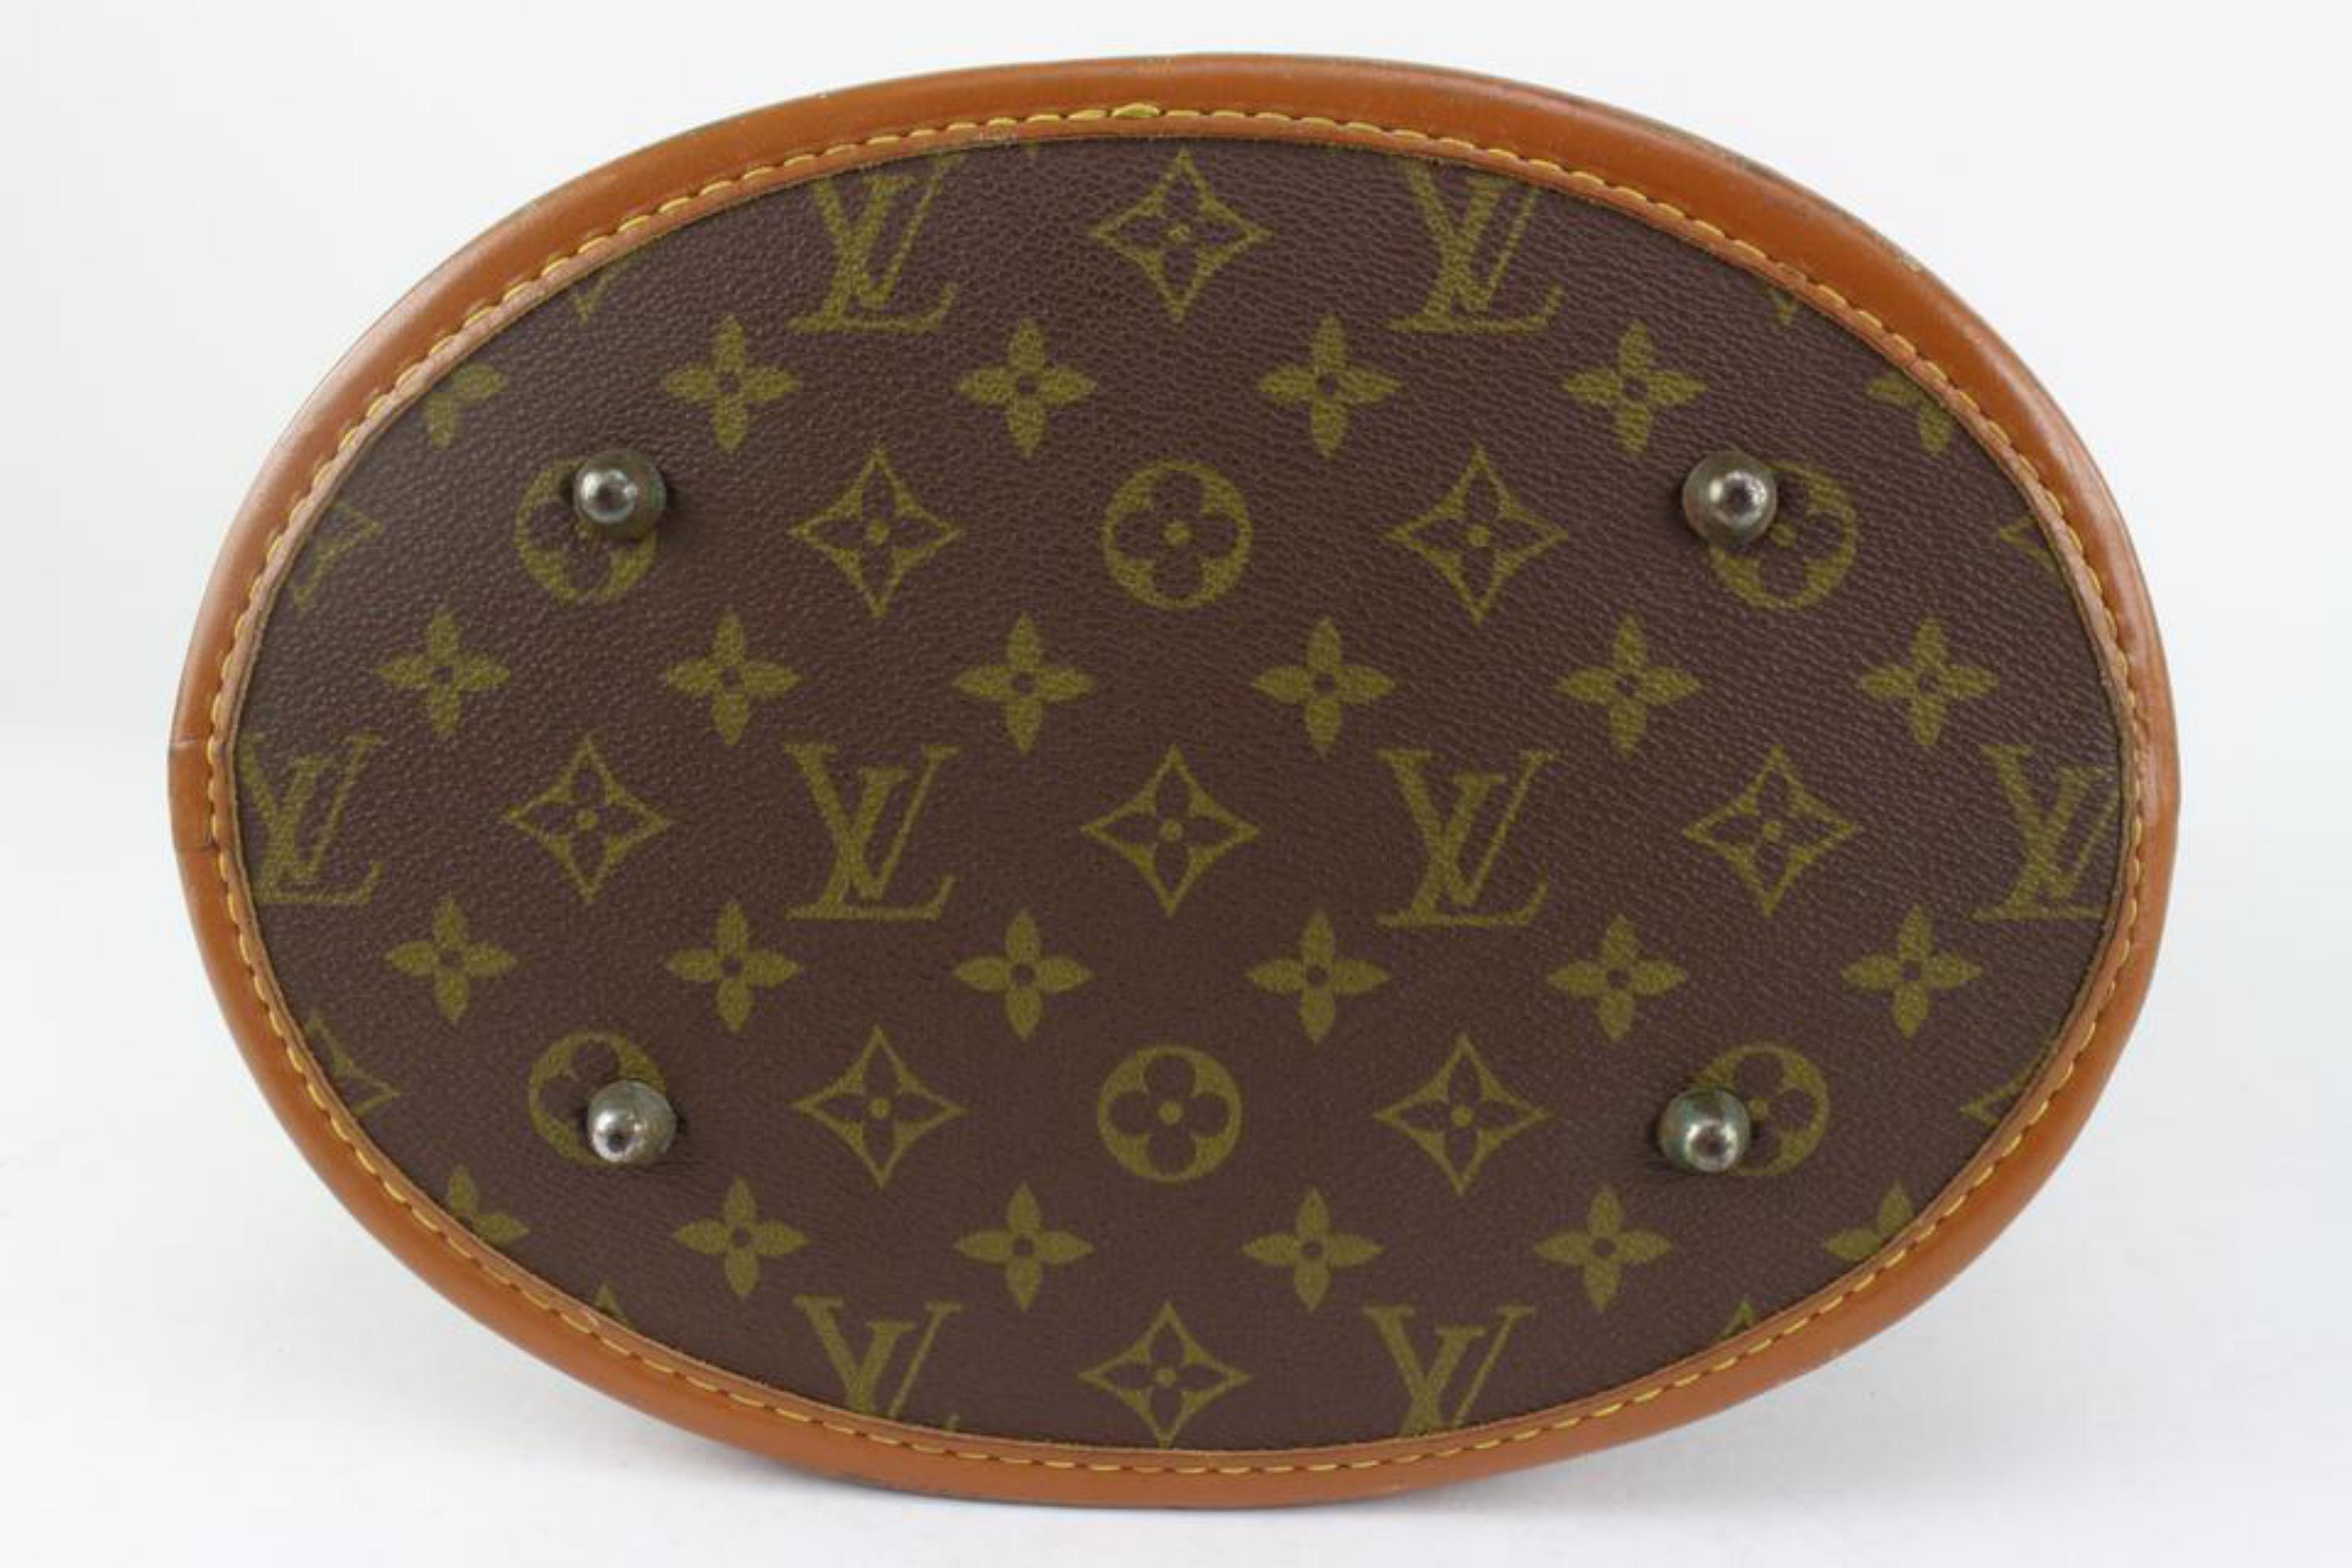 Louis Vuitton Large Monogram Marais Bucket GM Tote Bag 1118lv29 In Good Condition For Sale In Dix hills, NY